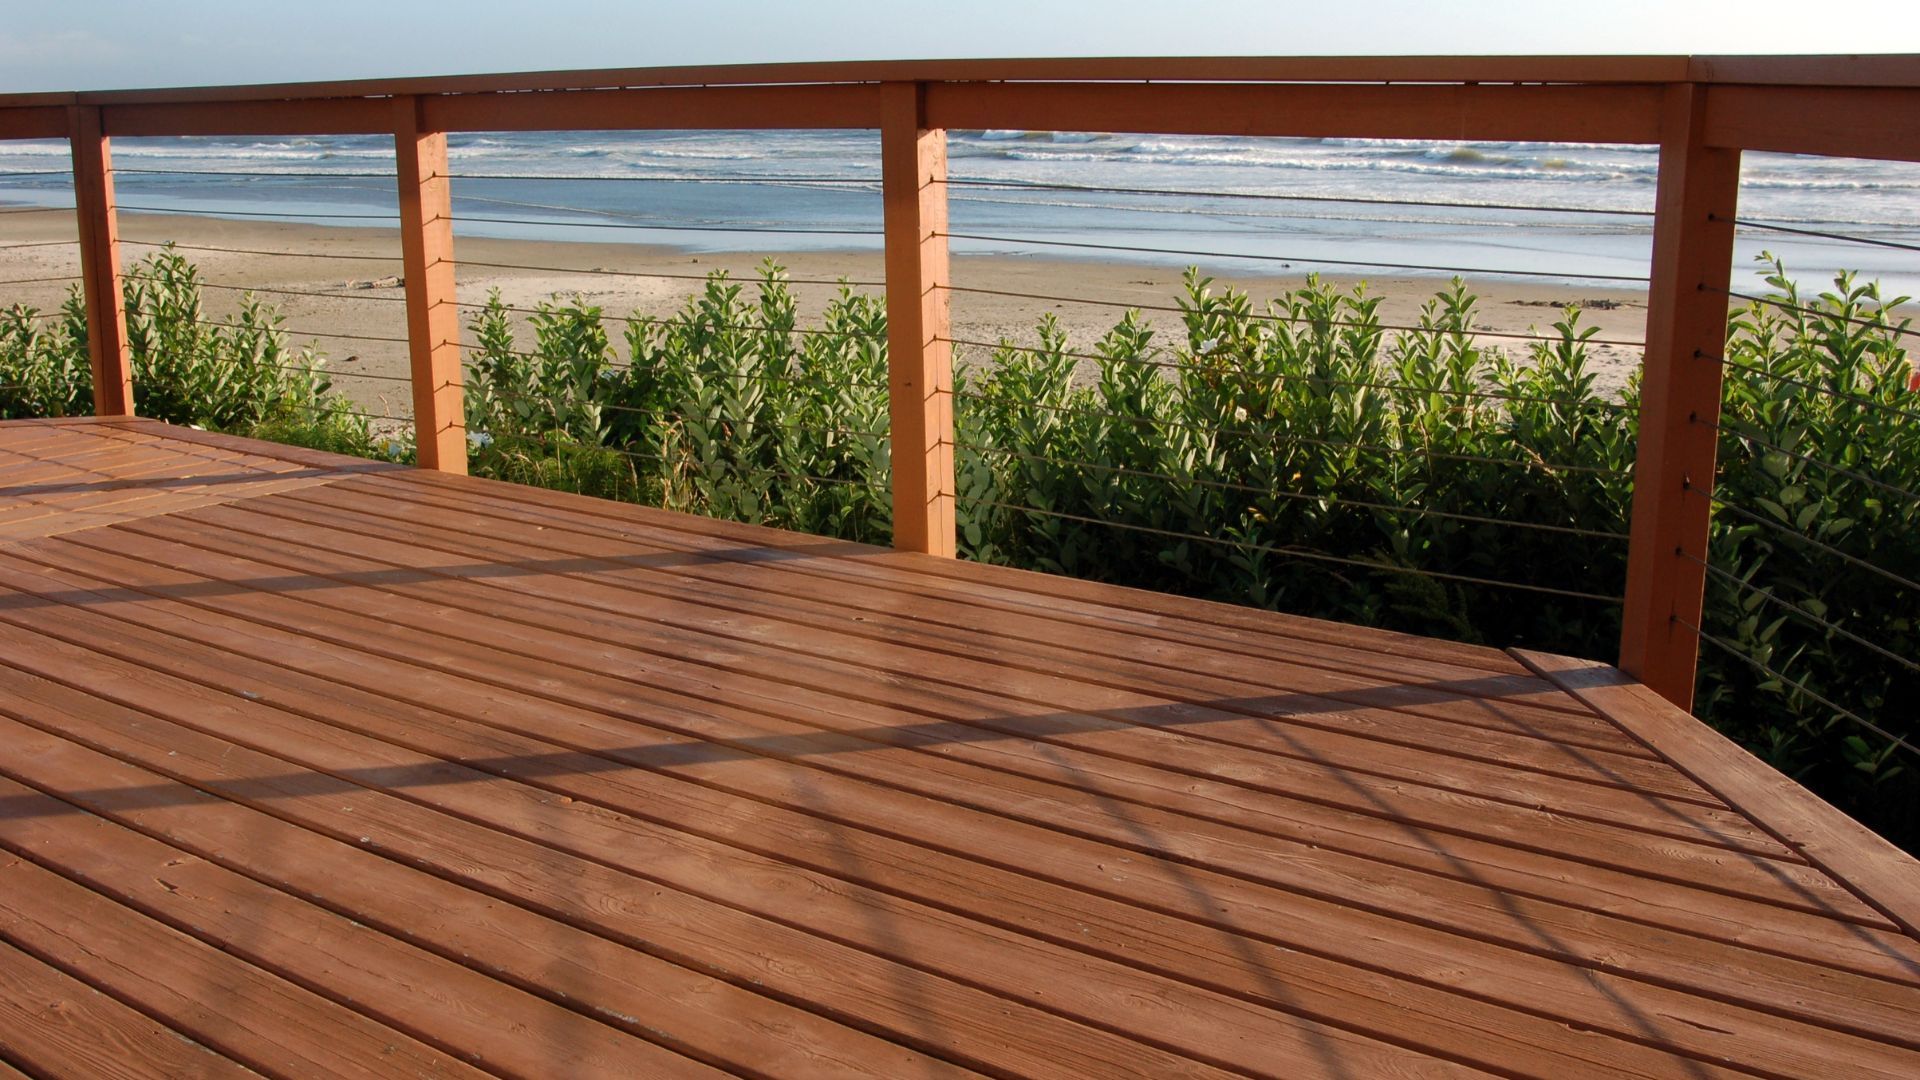 This image captures a beachfront wooden deck in Salinas, CA, offering a serene view of the ocean. The deck features warm-toned wooden planks and is bordered by a simple wooden railing, beyond which lush greenery and the sandy beach lead into the calm, expansive seascape. The deck provides a perfect spot for relaxation while embracing the coastal atmosphere, enhanced by the clear blue skies and gentle surf in the background.